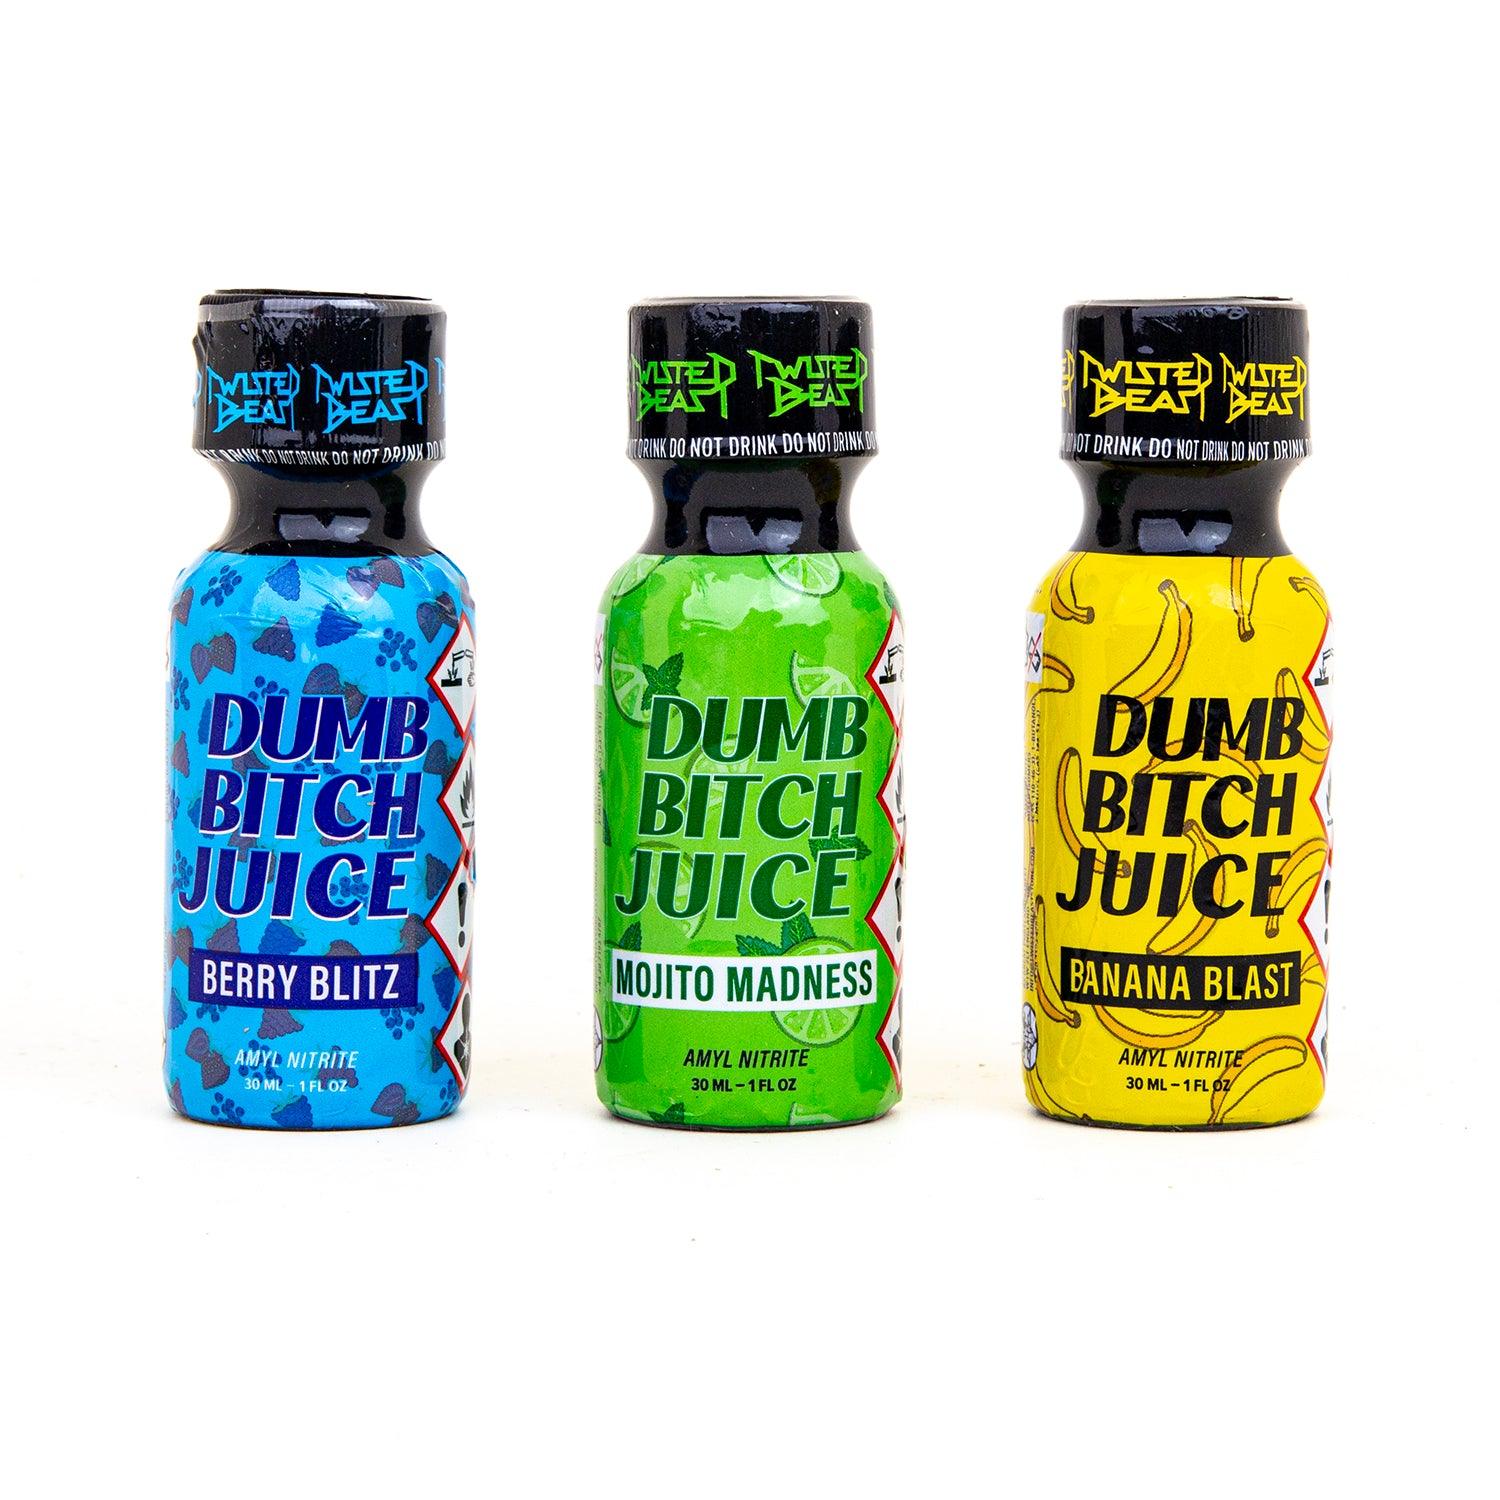 Dumb Bitch Juice, Fruit Loopy Scented Bundle by Twisted Beast